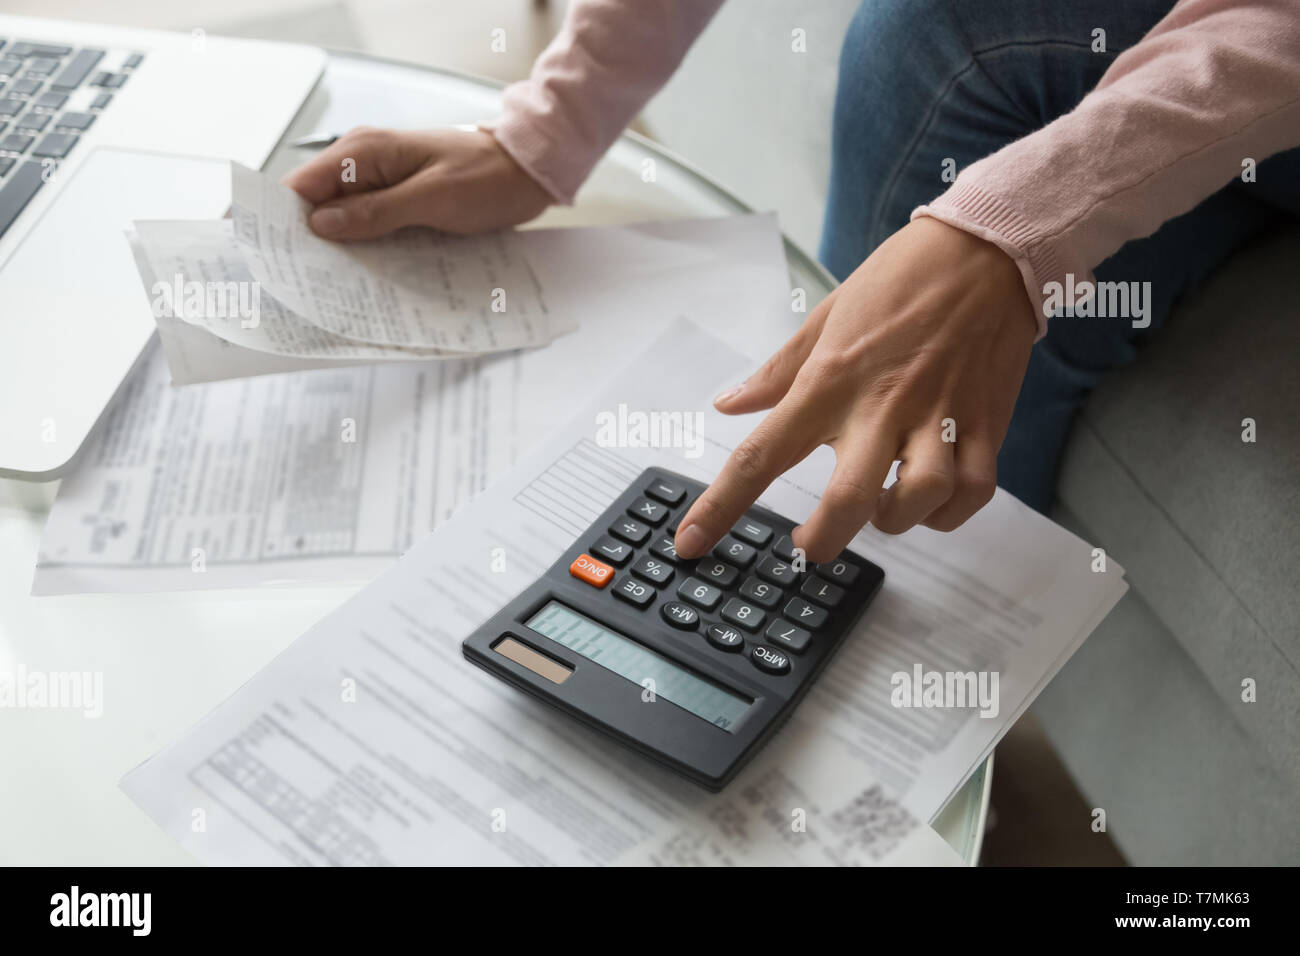 Close up woman hands holding receipt calculating company expenses Stock Photo